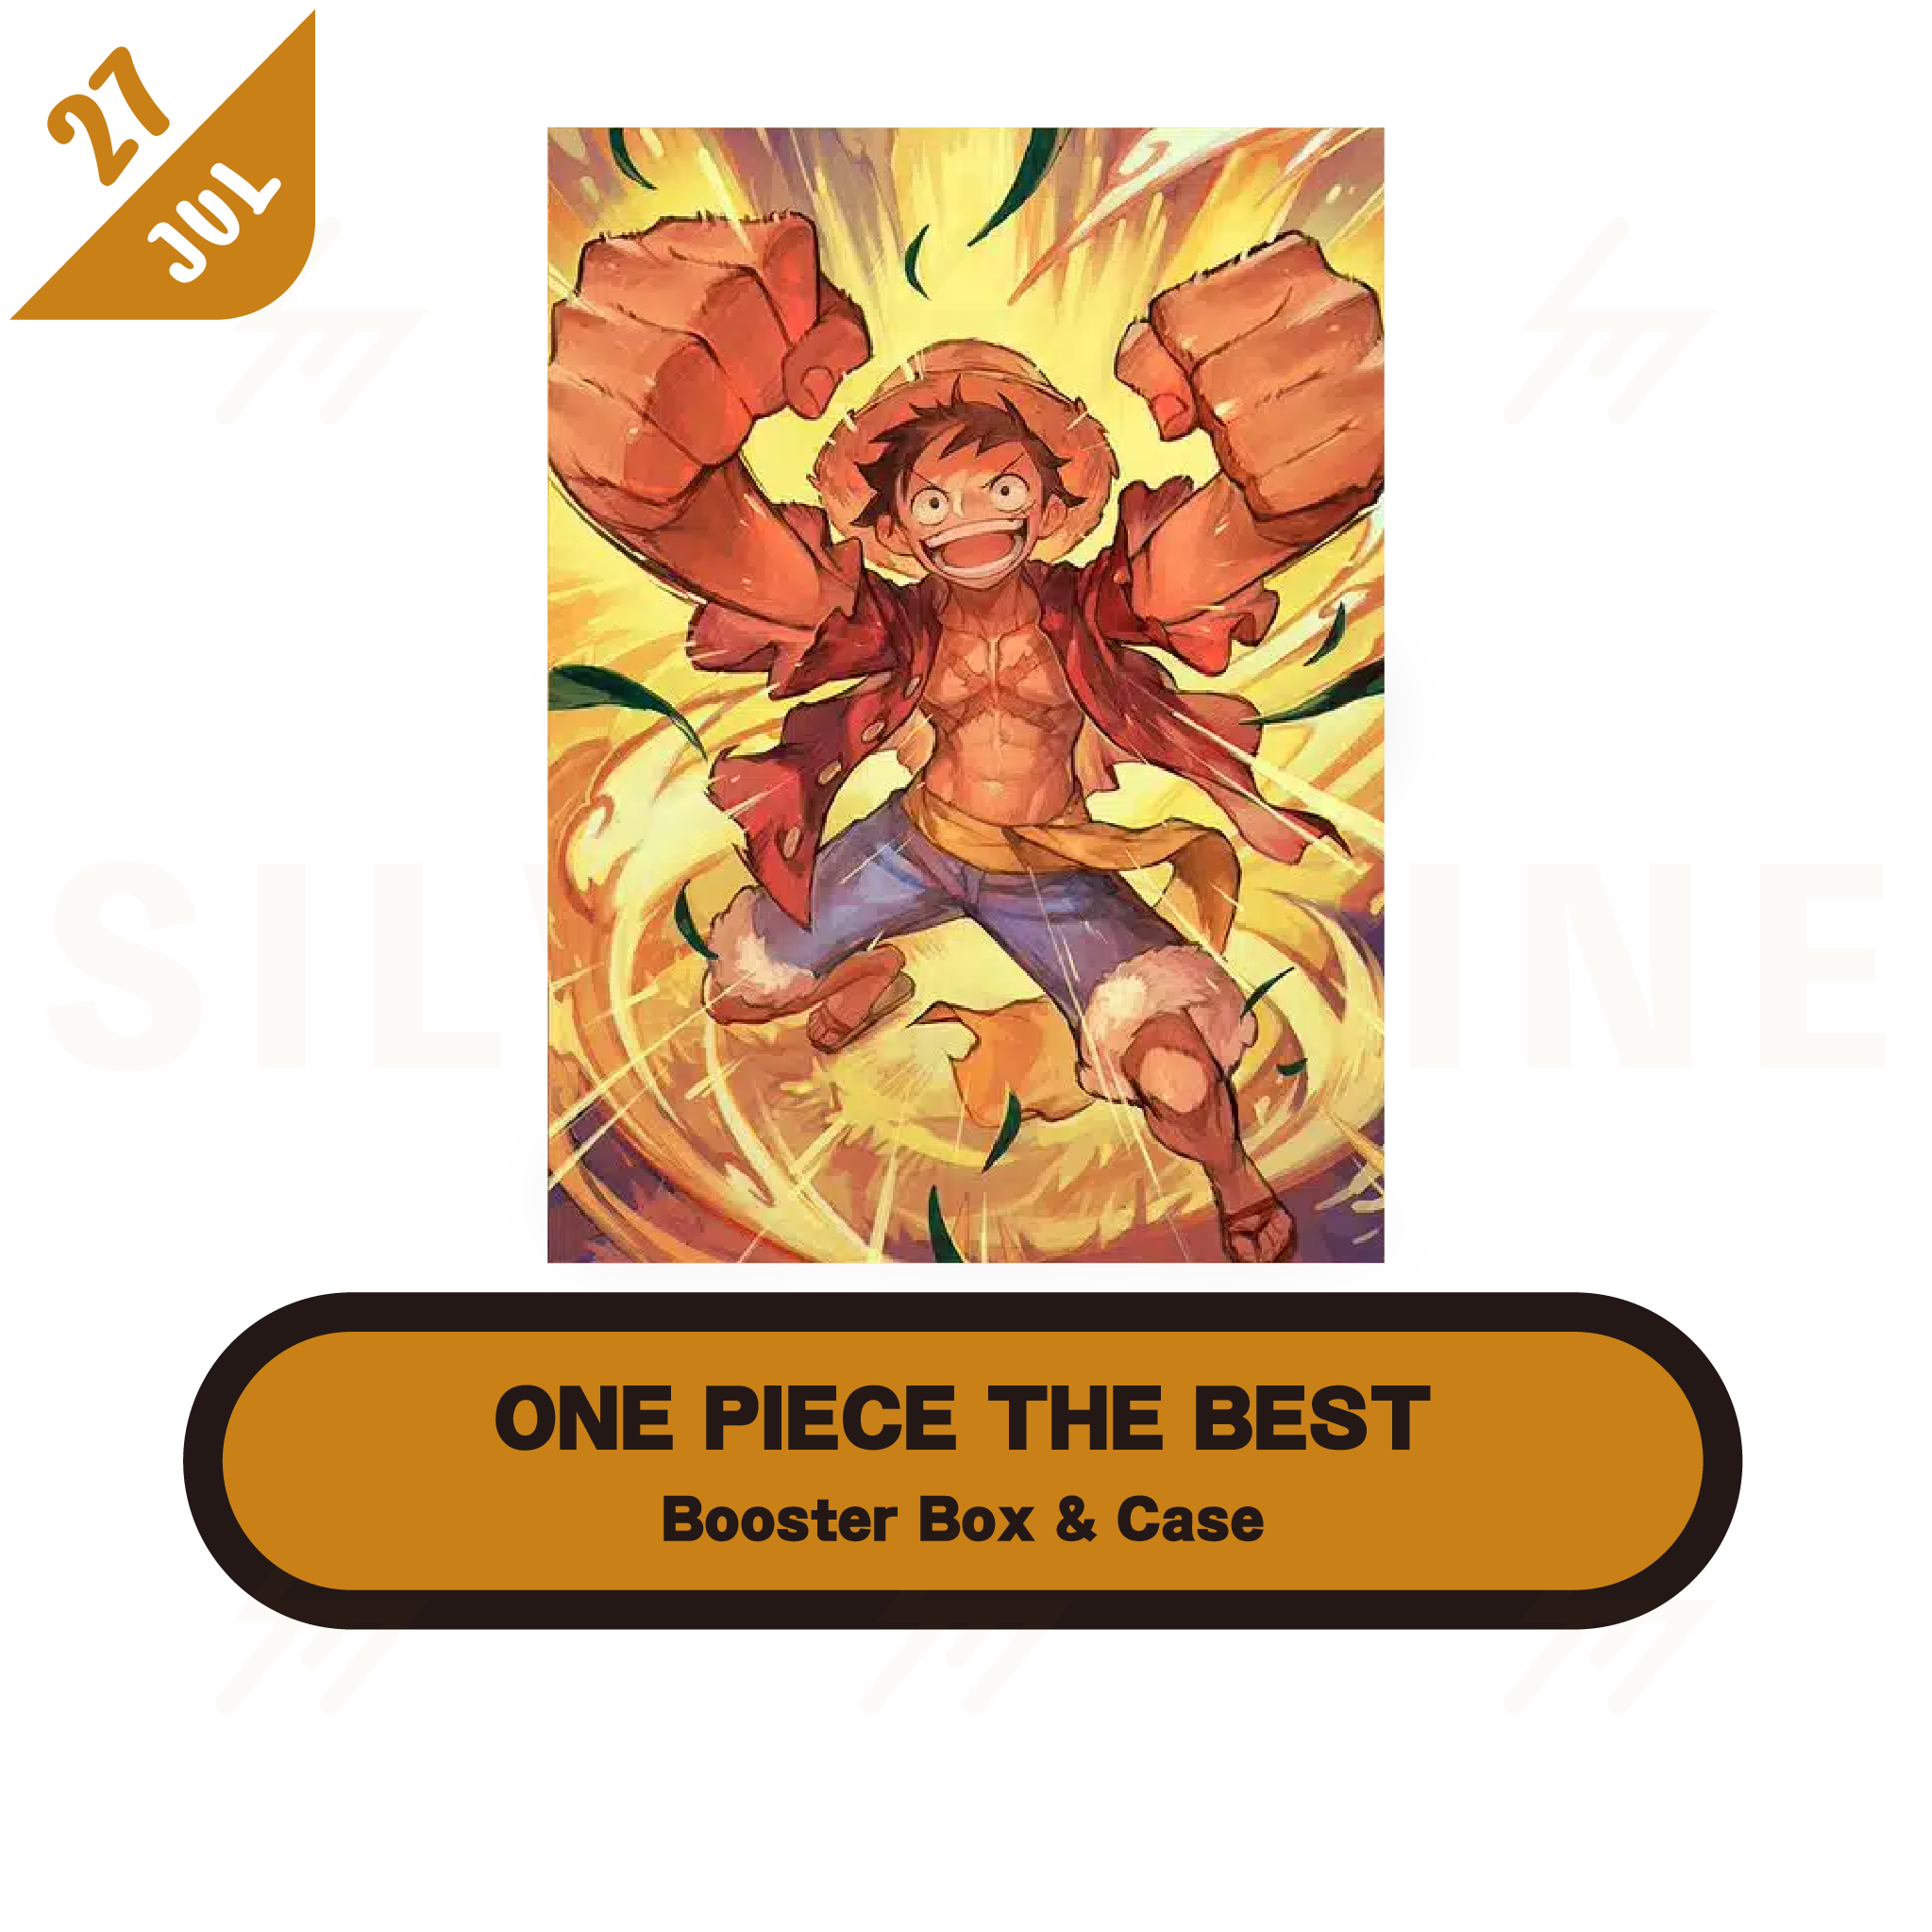 PRE-ORDER: One Piece - PRB01 - ONE PIECE CARD THE BEST